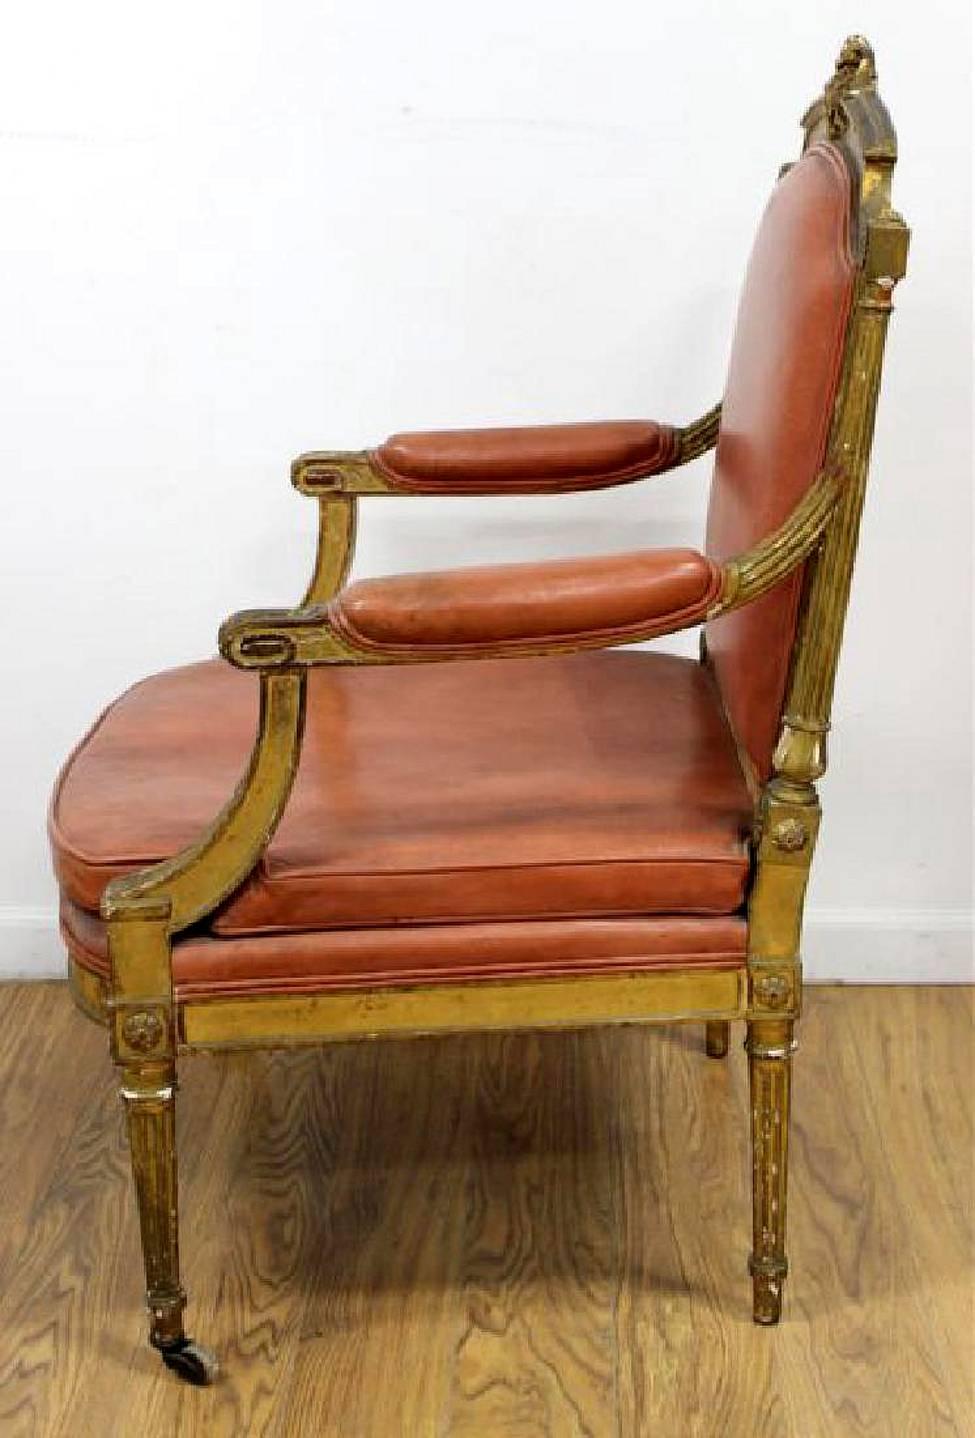 In the Louis XVI fashion, these chairs are elegant and yet very masculine. The current surface shows great character but can be restored if you prefer for a fee.

The upholstery is a very "Maison Jansen" style burnt sienna color but can